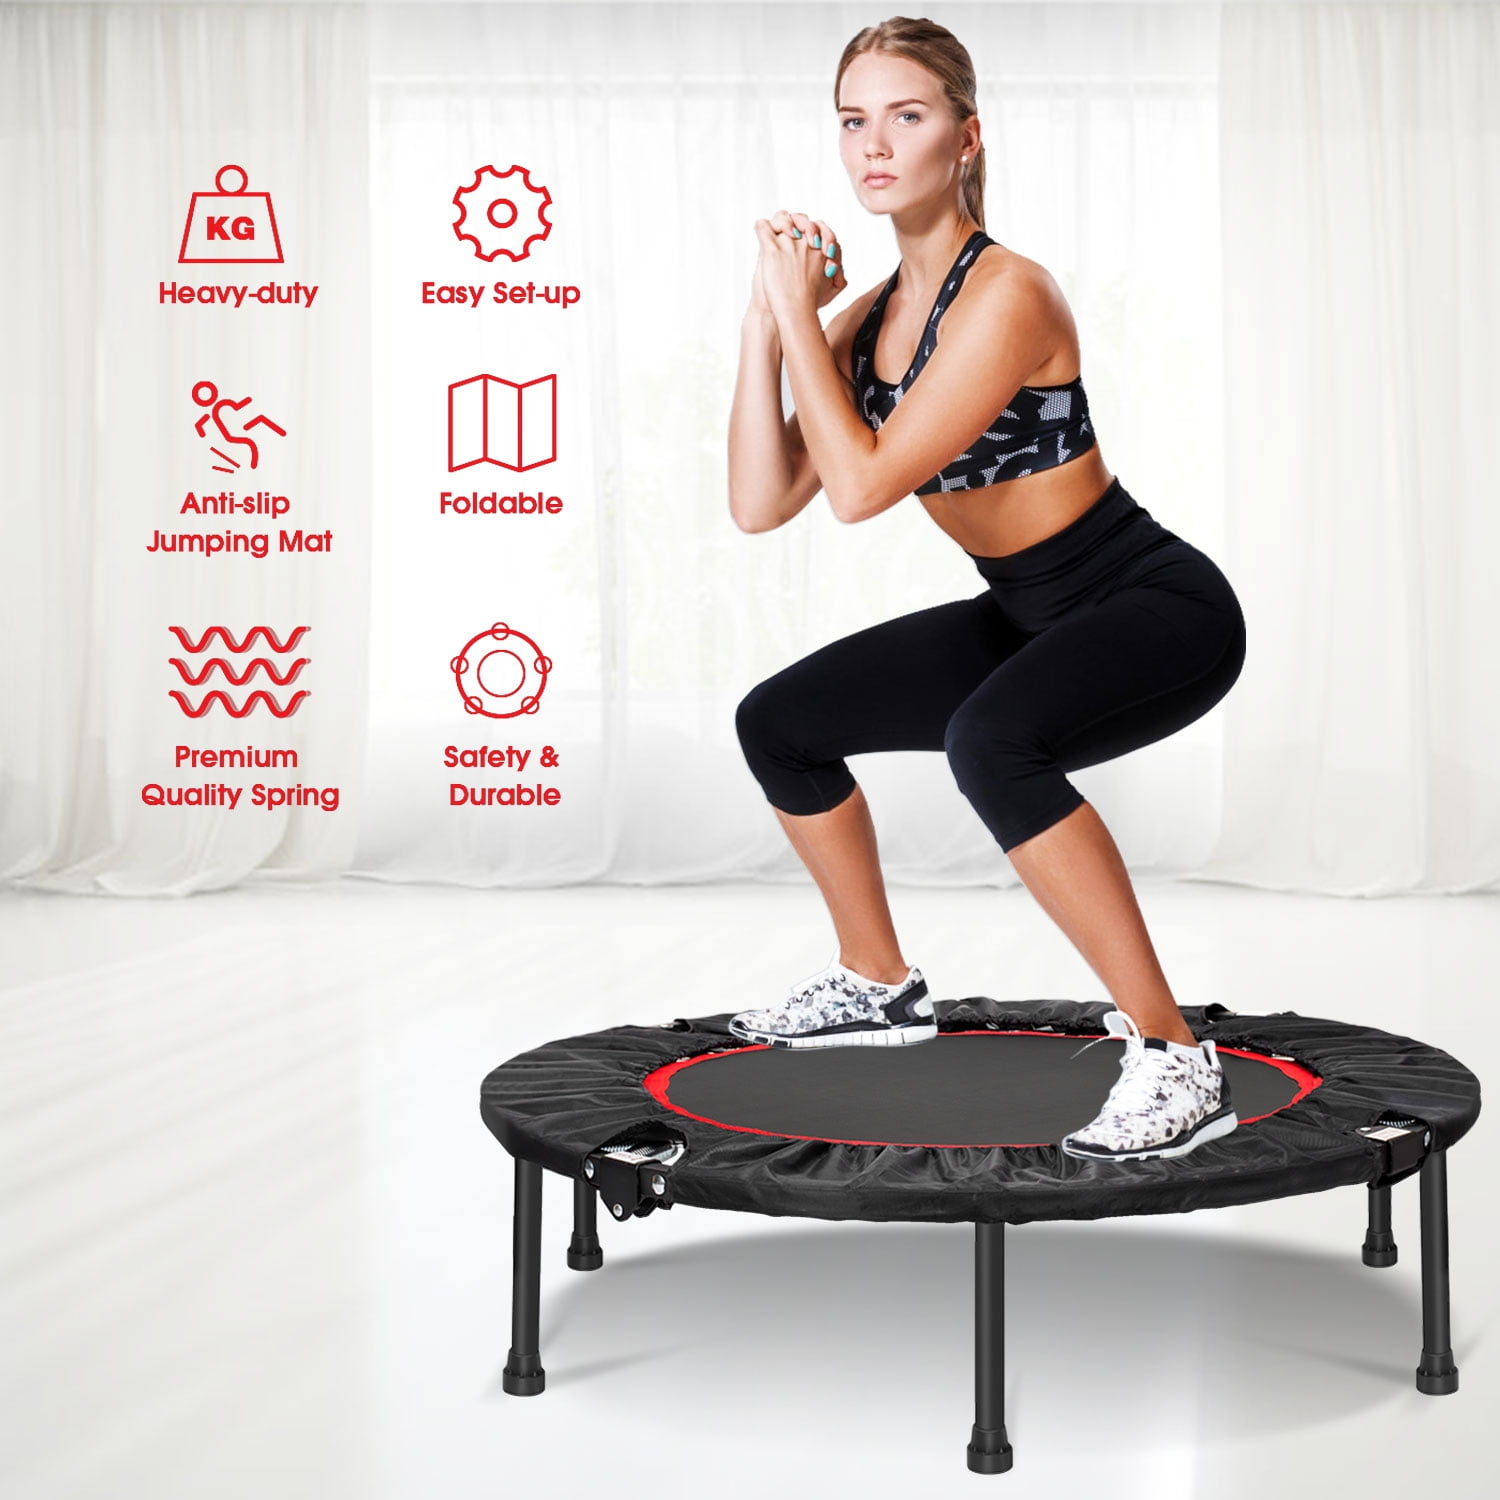 vogek Indoor Mini Exercise Trampoline with Safety Pad Adjustable Handle Bar Portable & Foldable 40 Rebounder Mini Bouncer for Adults Kids Body Fitness Training Workouts Blue 